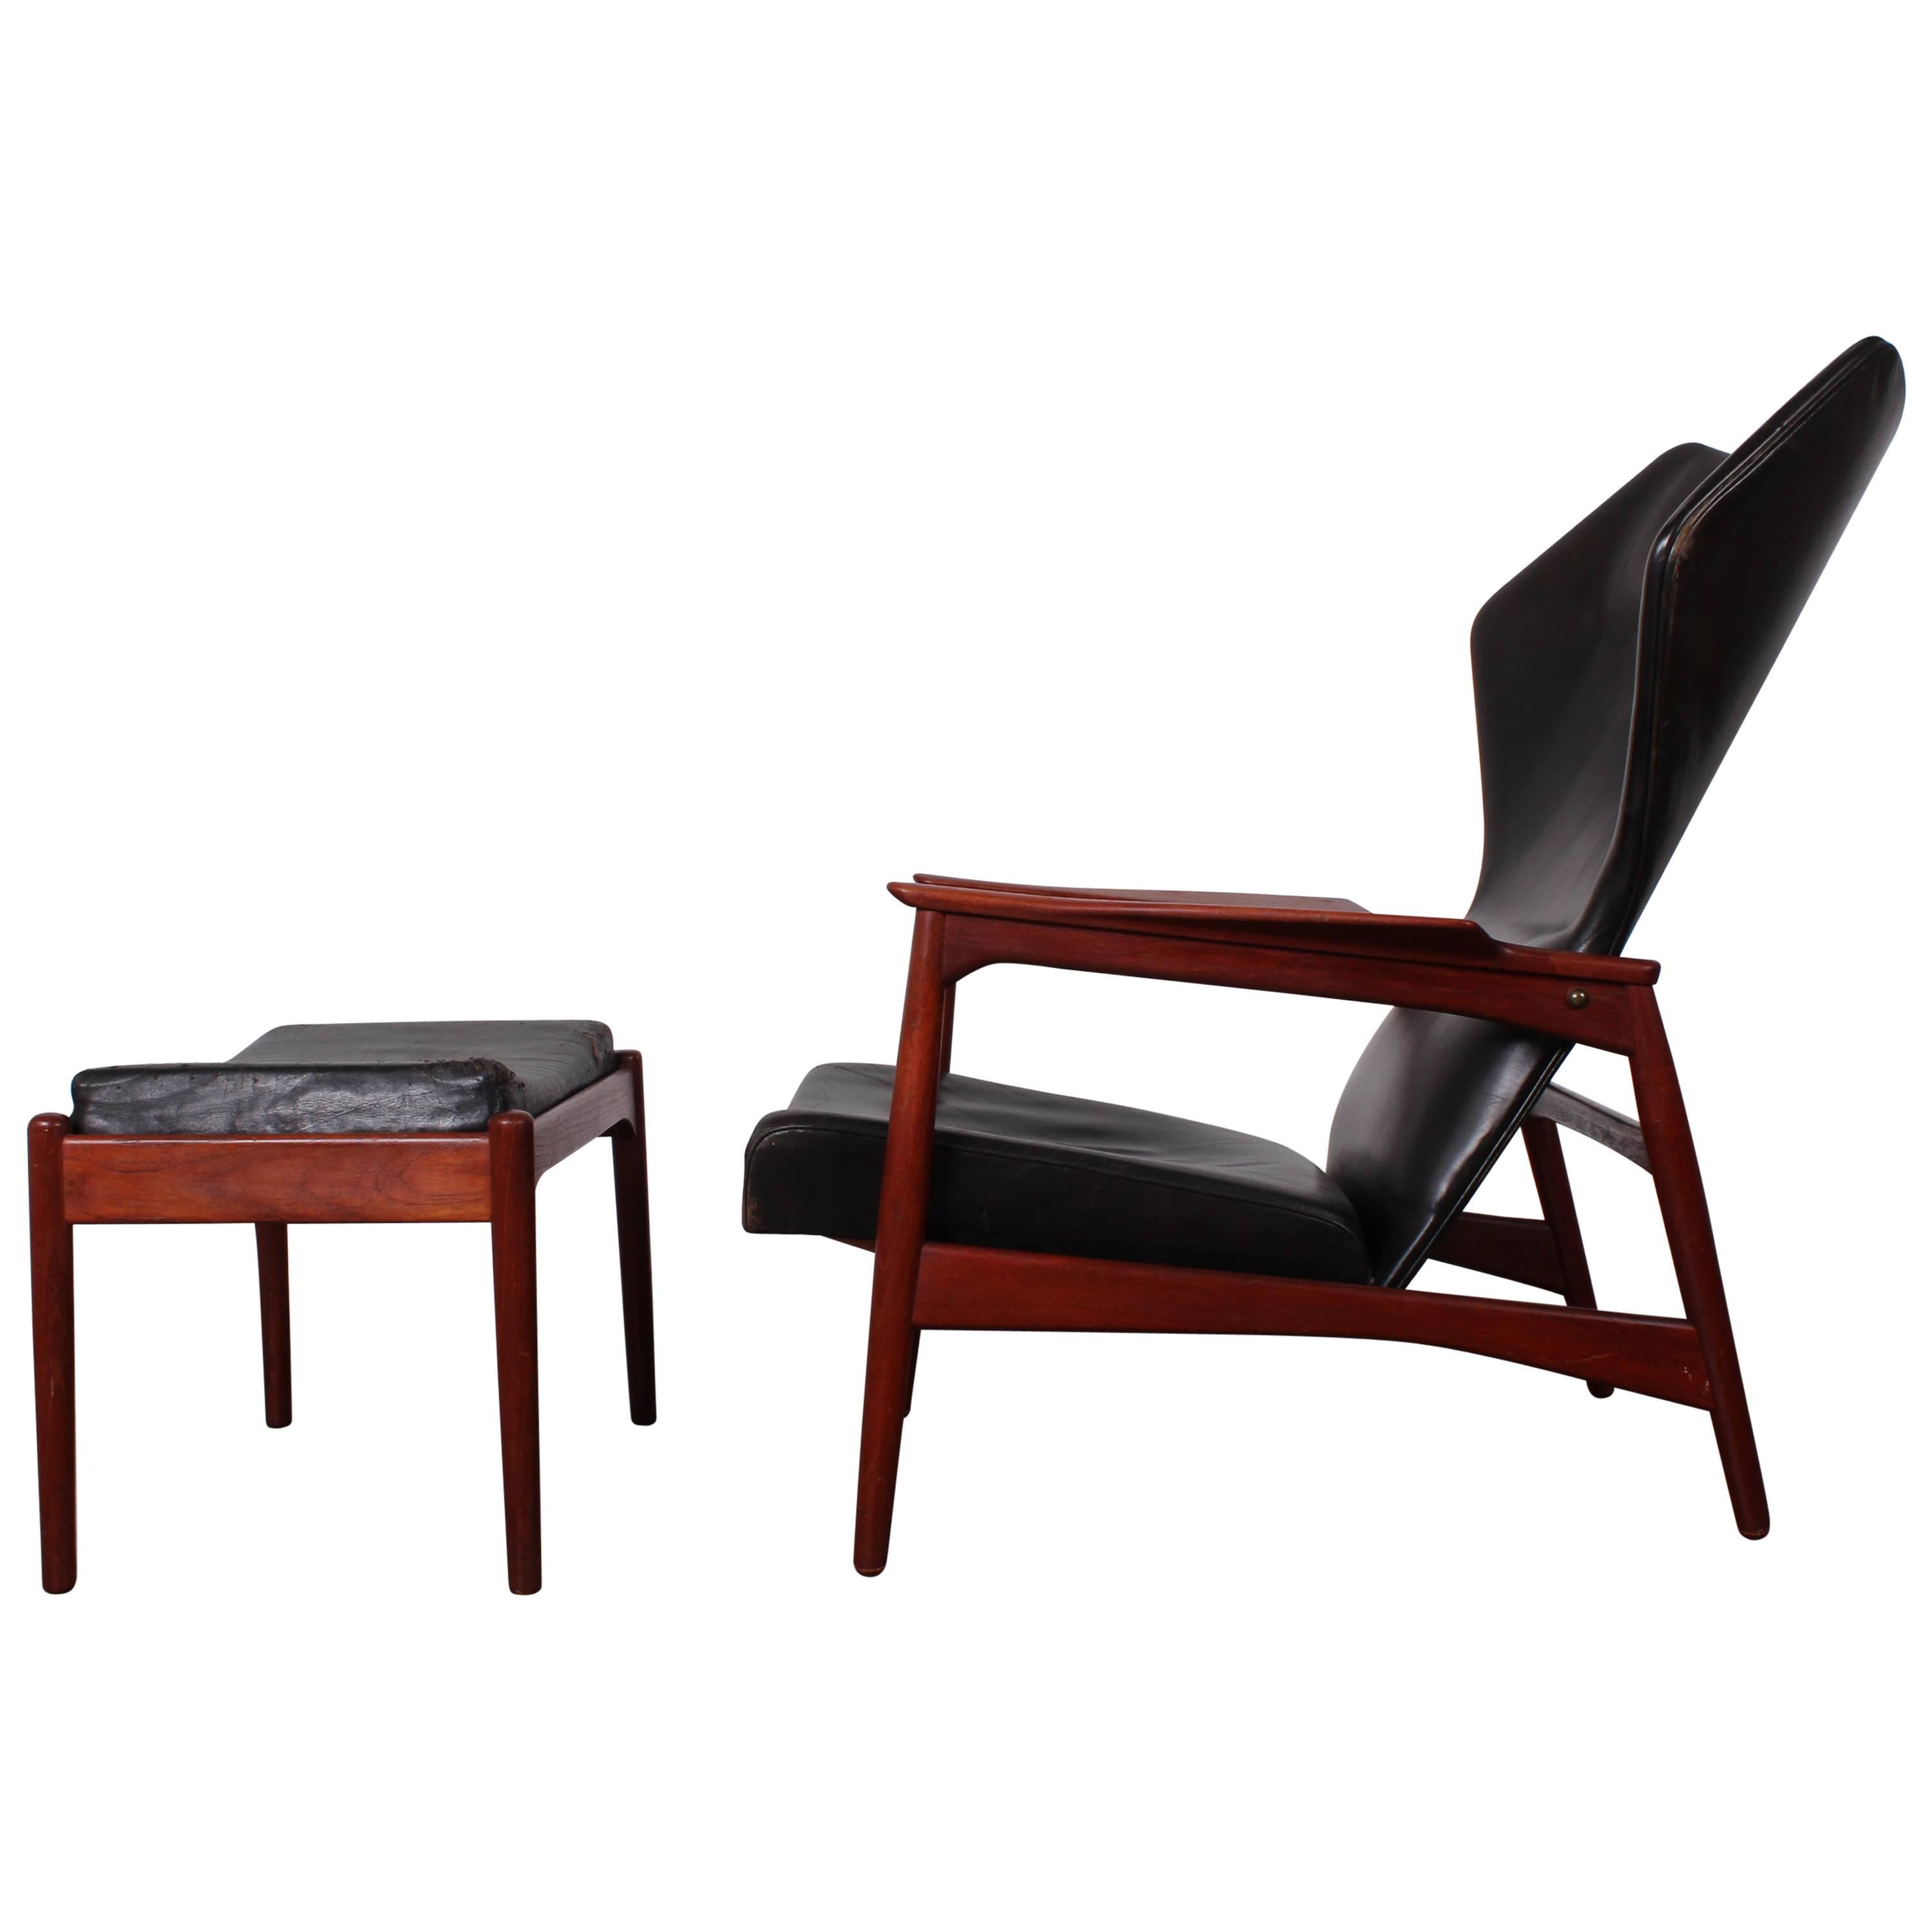 Adjustable Leather Lounge Chair and Ottoman by Ib Kofod-Larsen